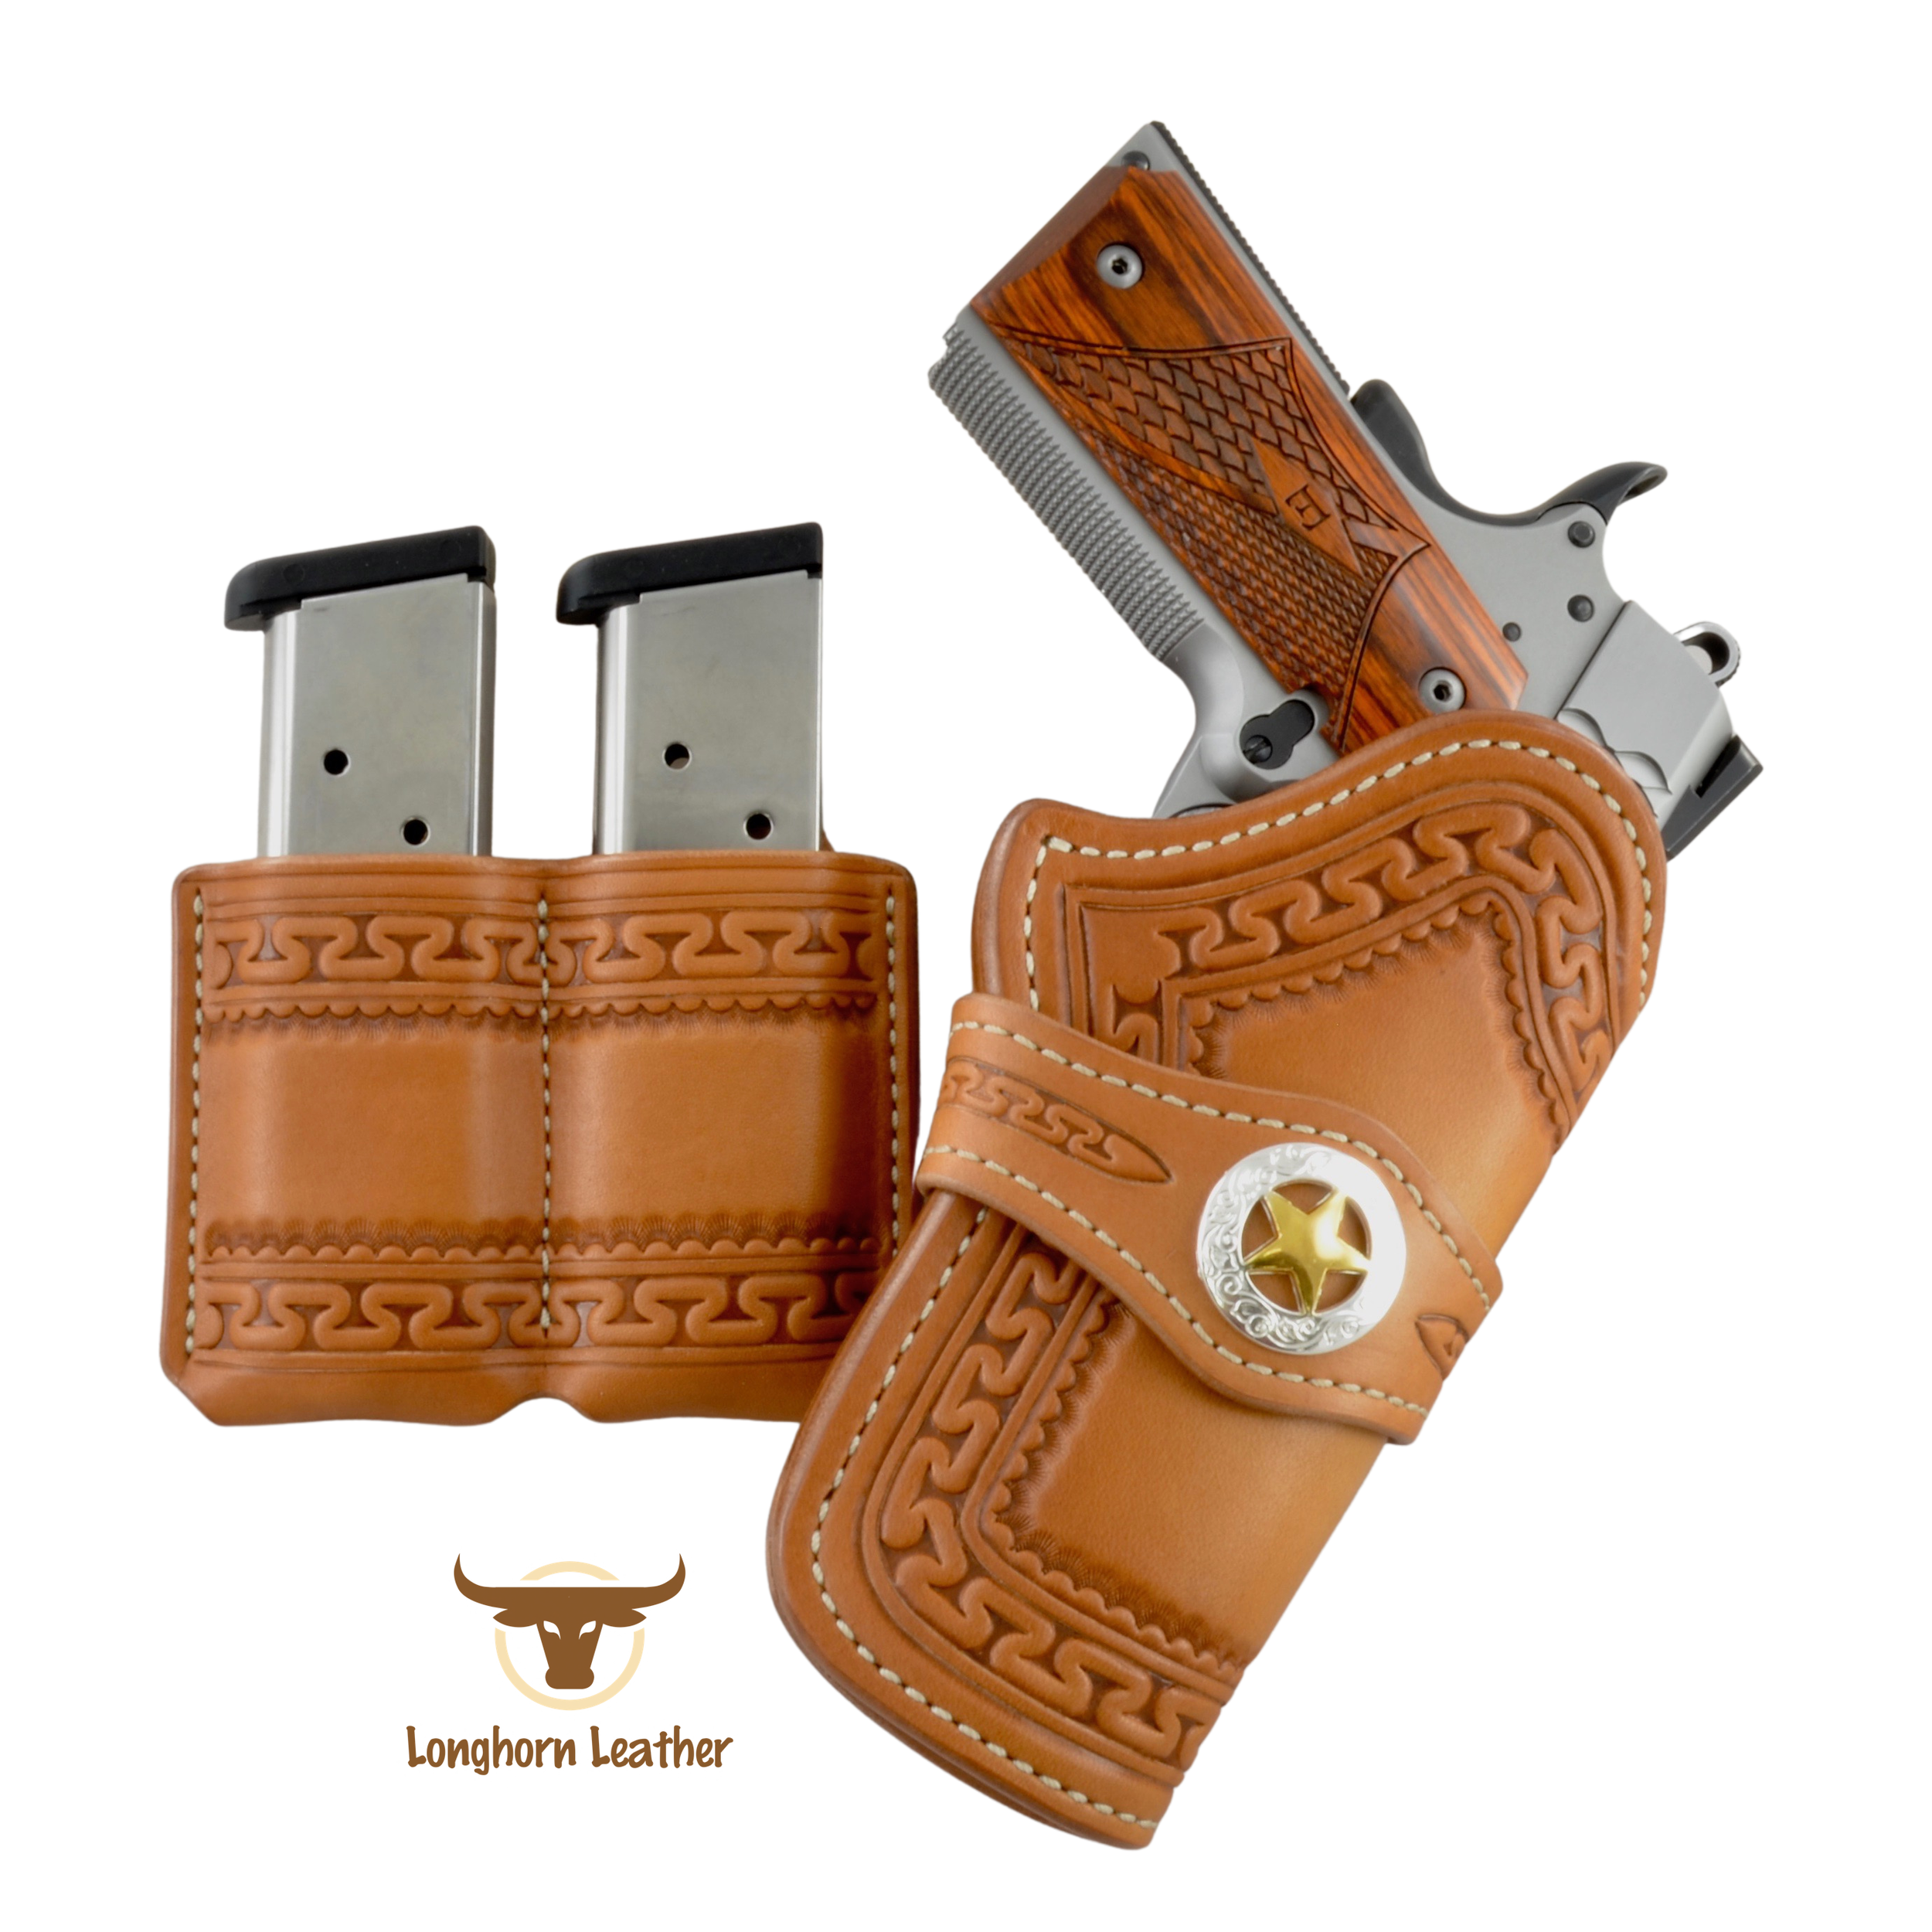 Custom leather 1911 holster and double magazine carrier featuring the "Yuma" design.  Individually handcrafted at Longhorn Leather AZ